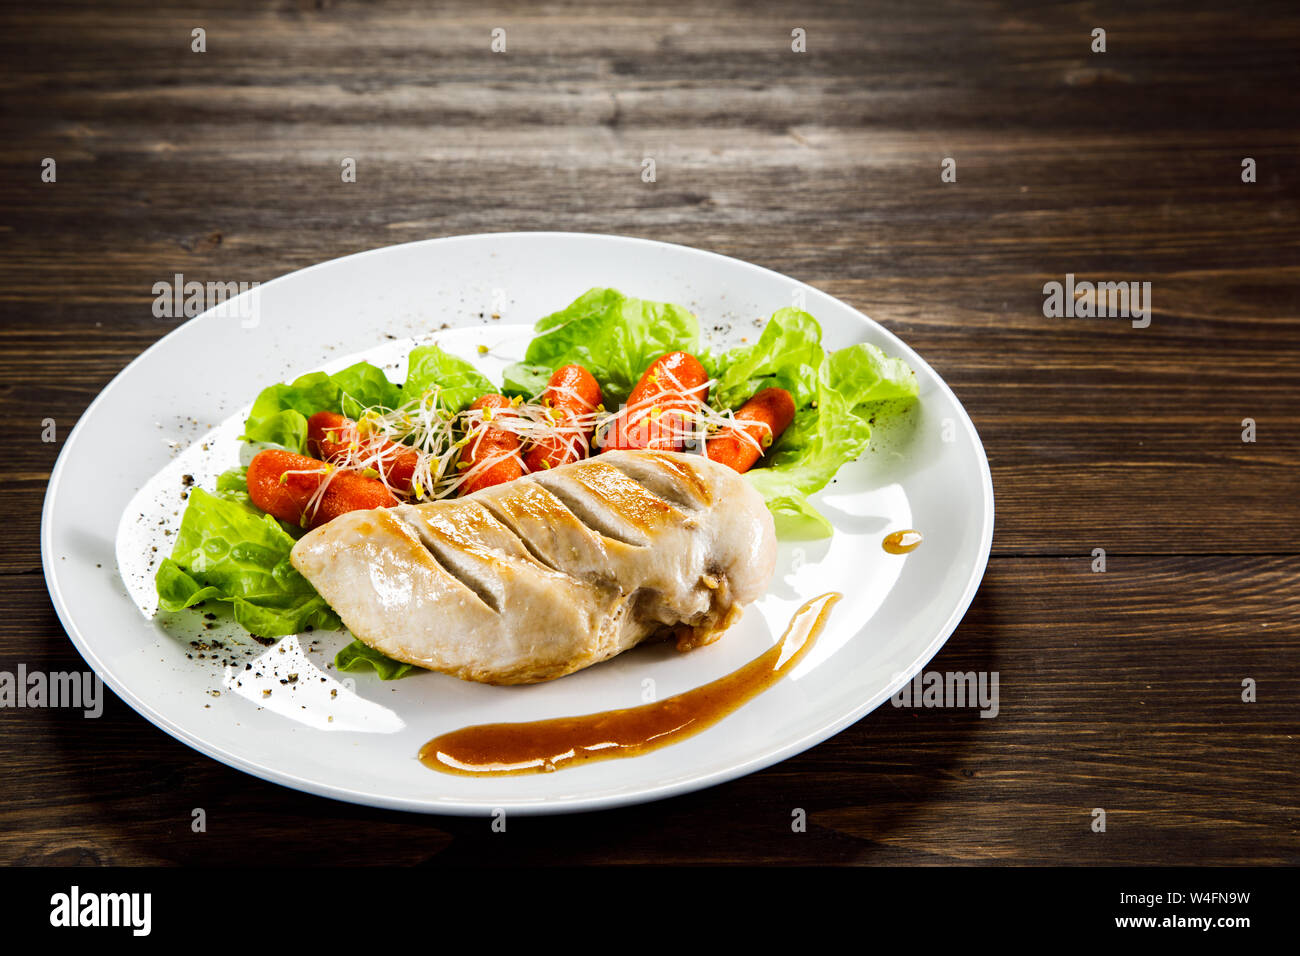 Grilled chicken fillet and vegetables Stock Photo